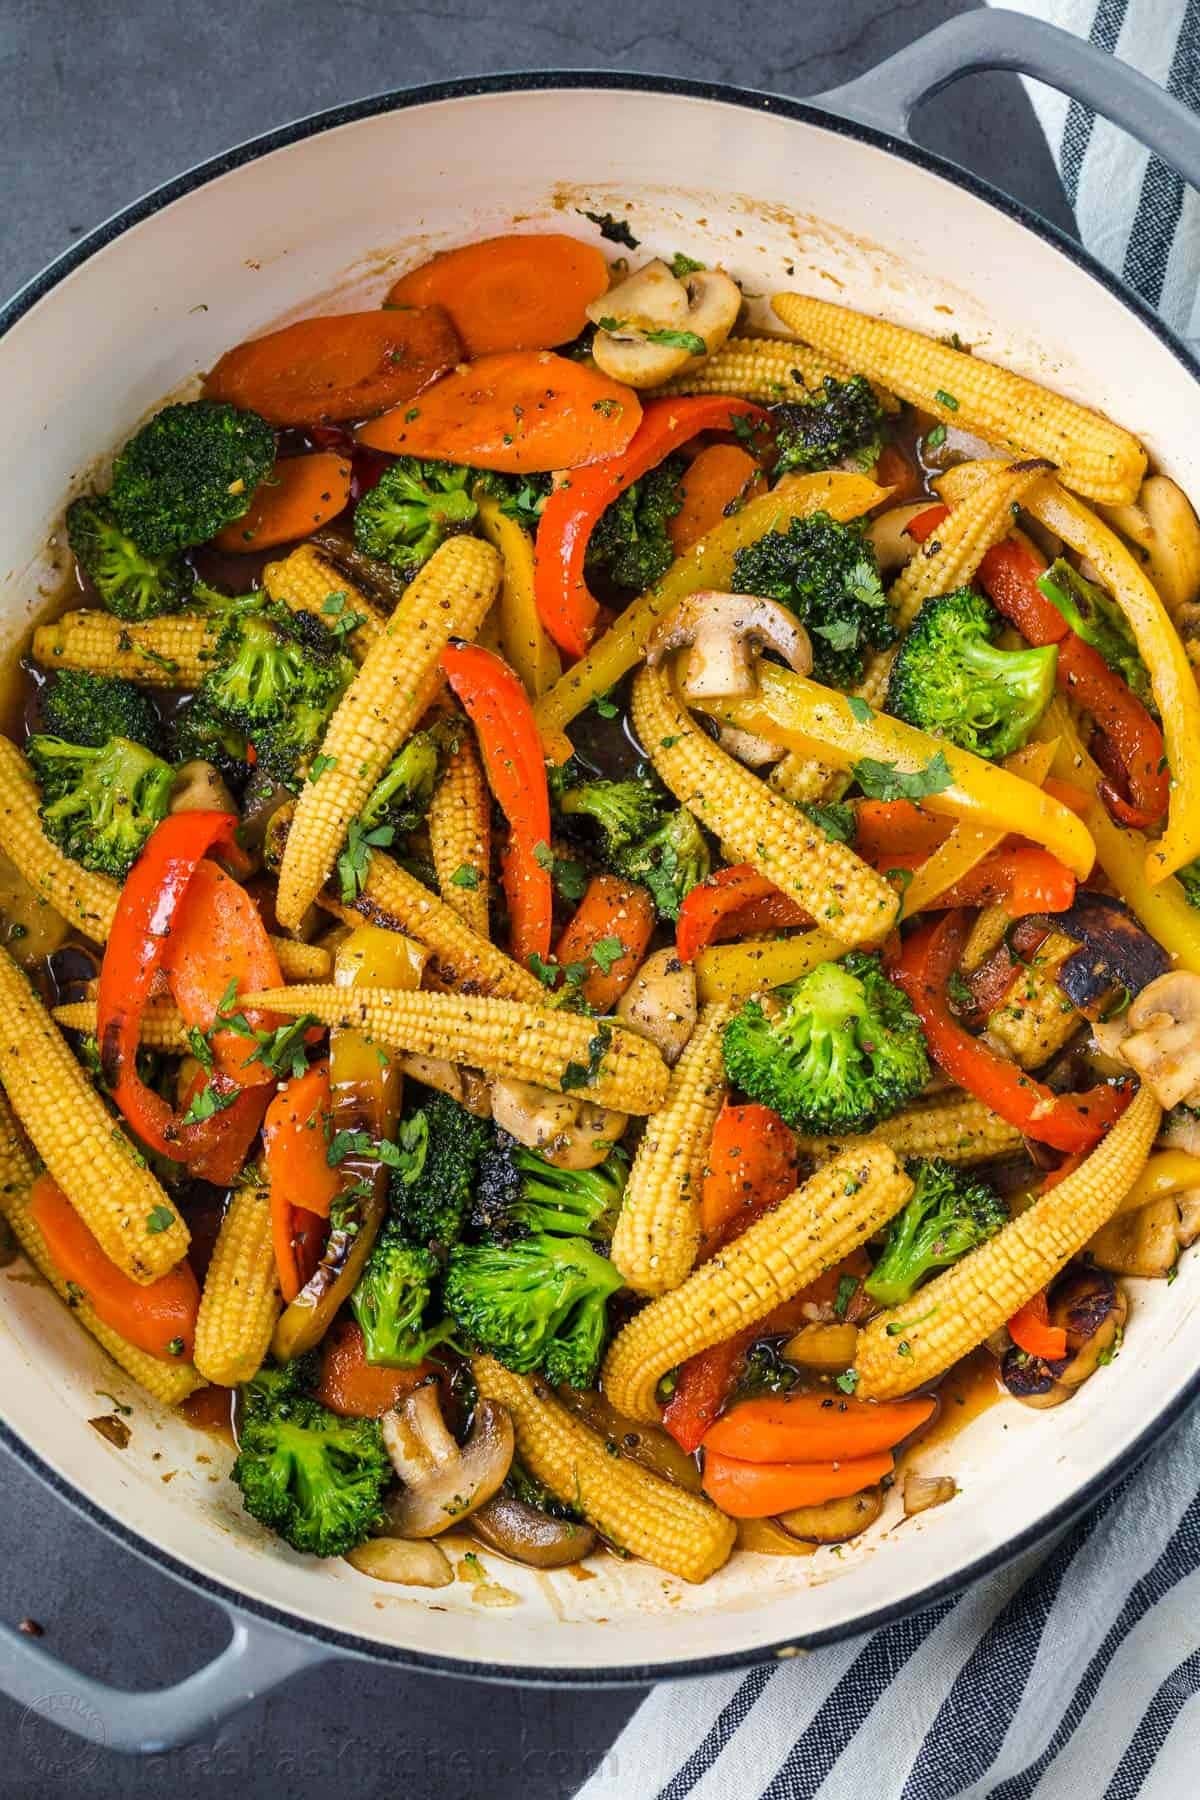 Baby corn spears, mushrooms, red pepper and broccoli stir fried on a white pan.